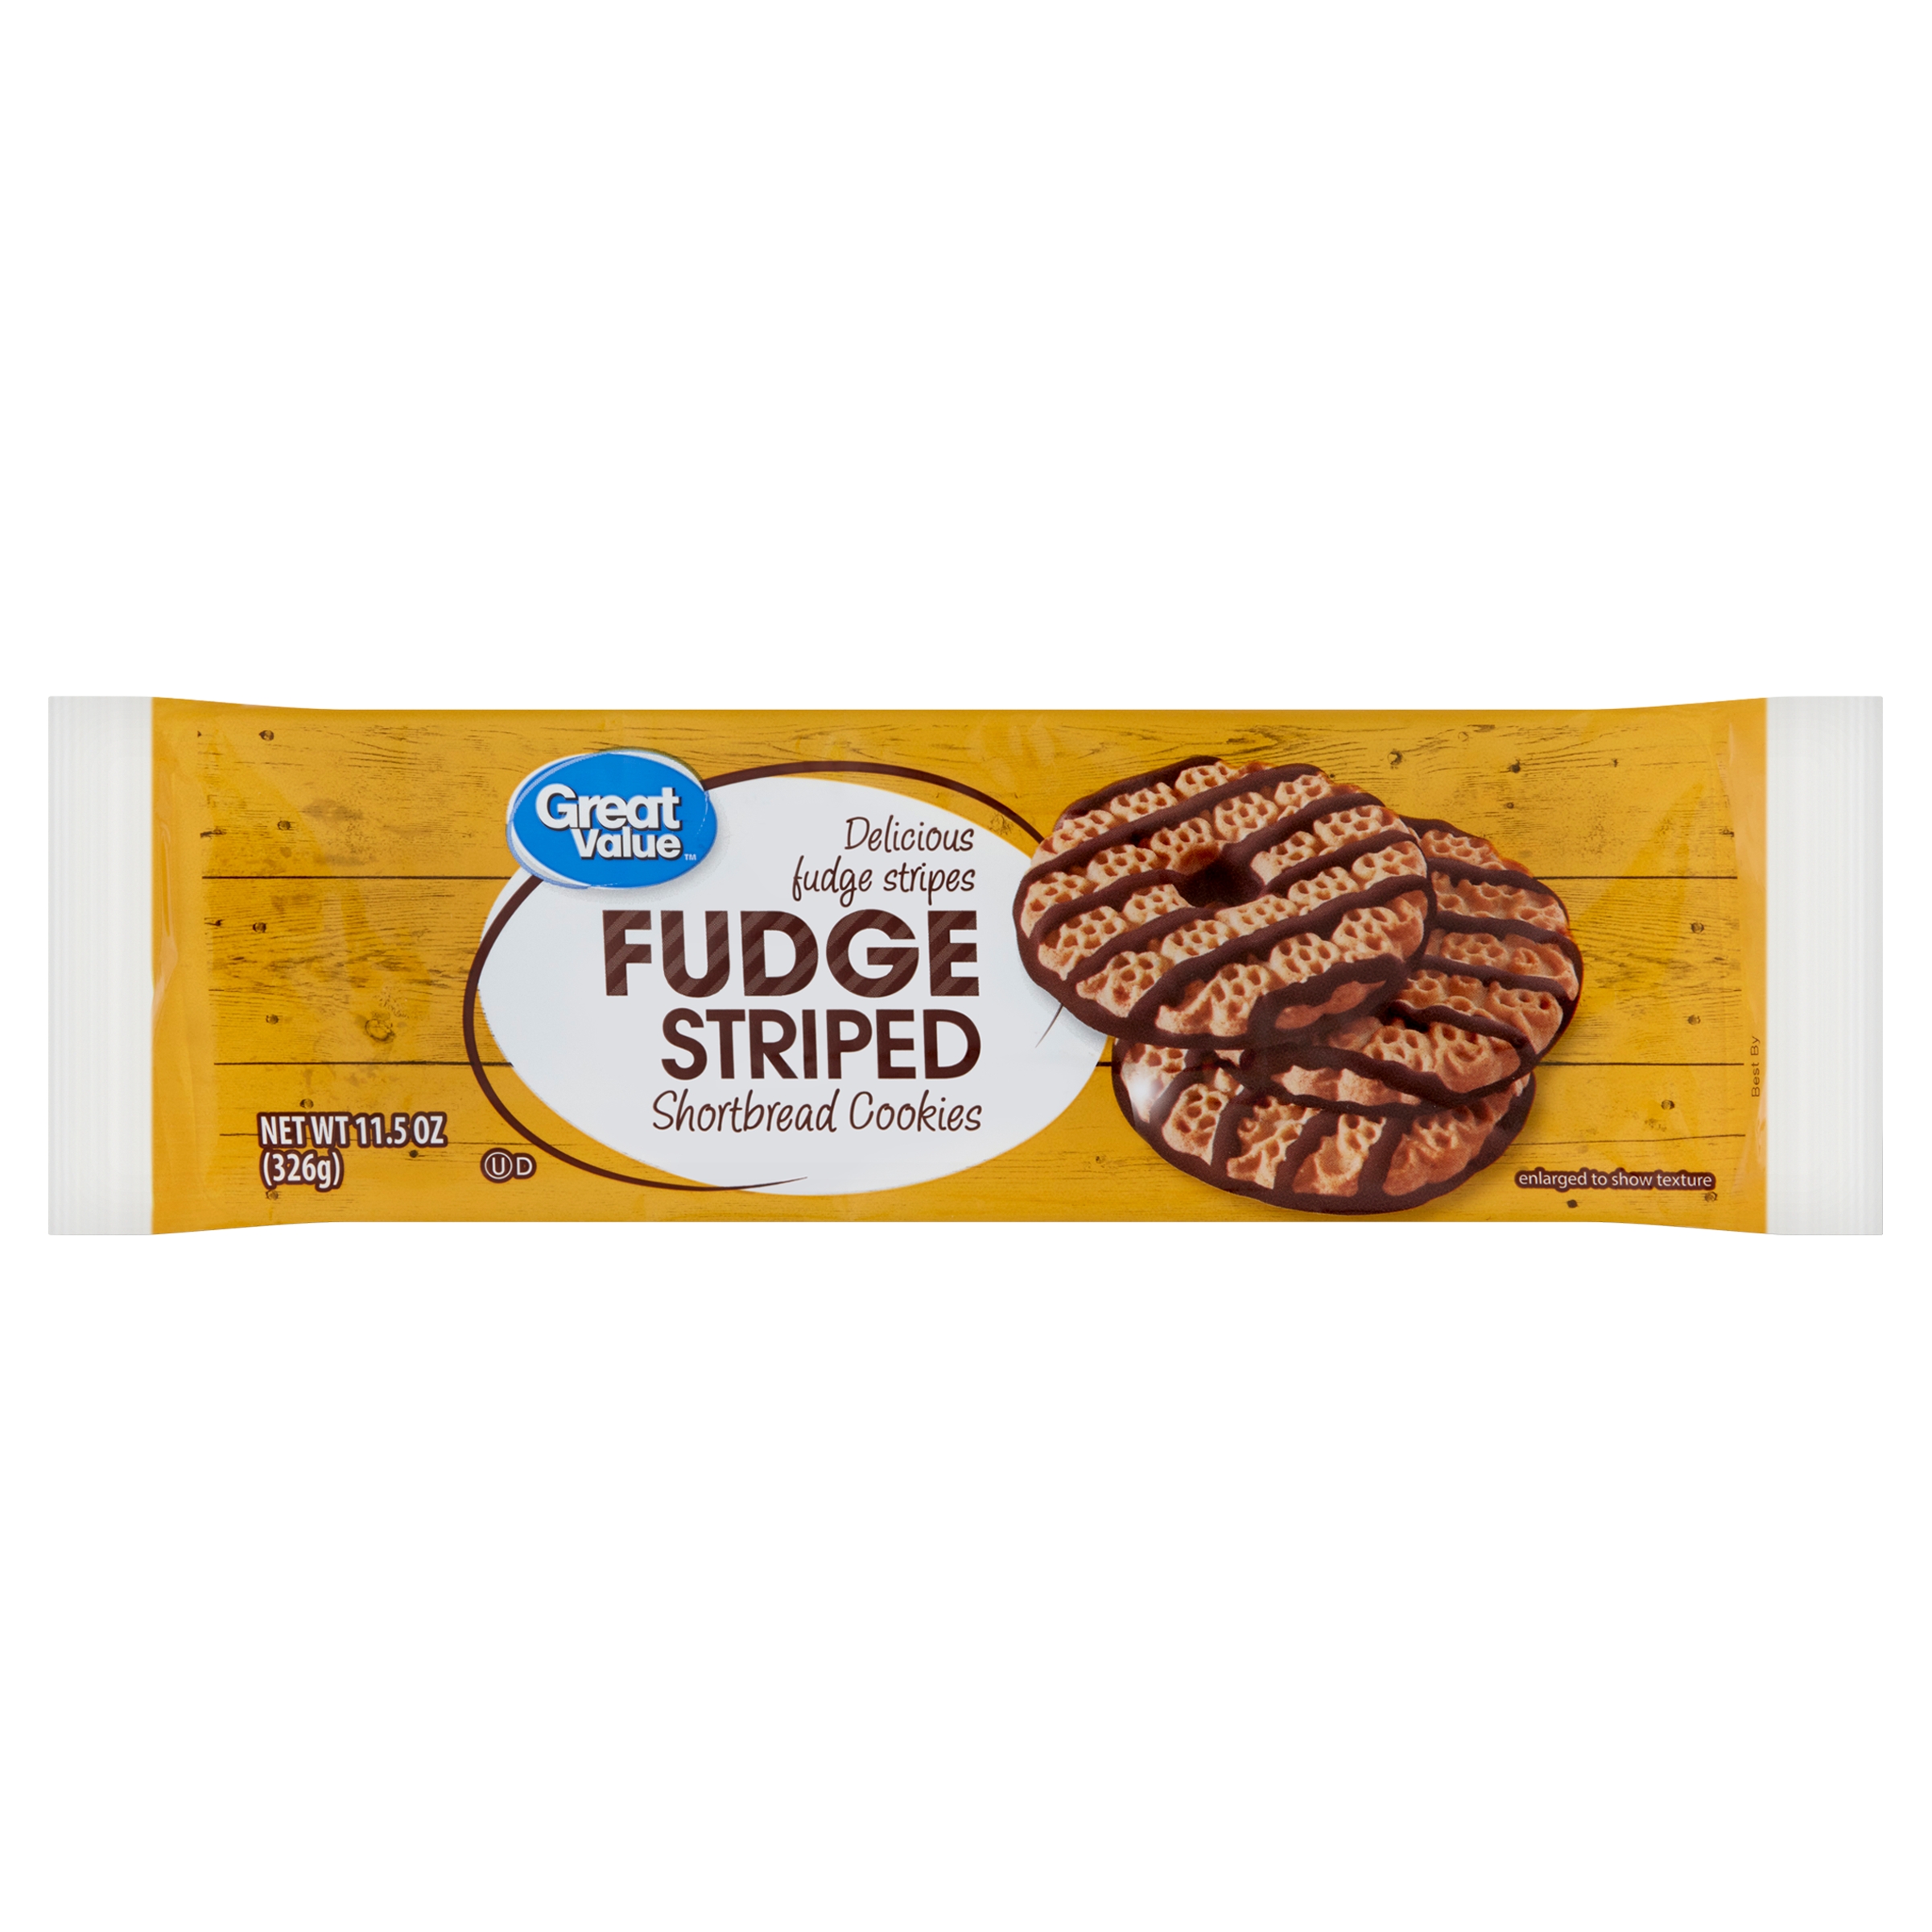 Great Value Fudge Striped Shortbread Cookies, 27 Count, 11.5 oz - image 1 of 3